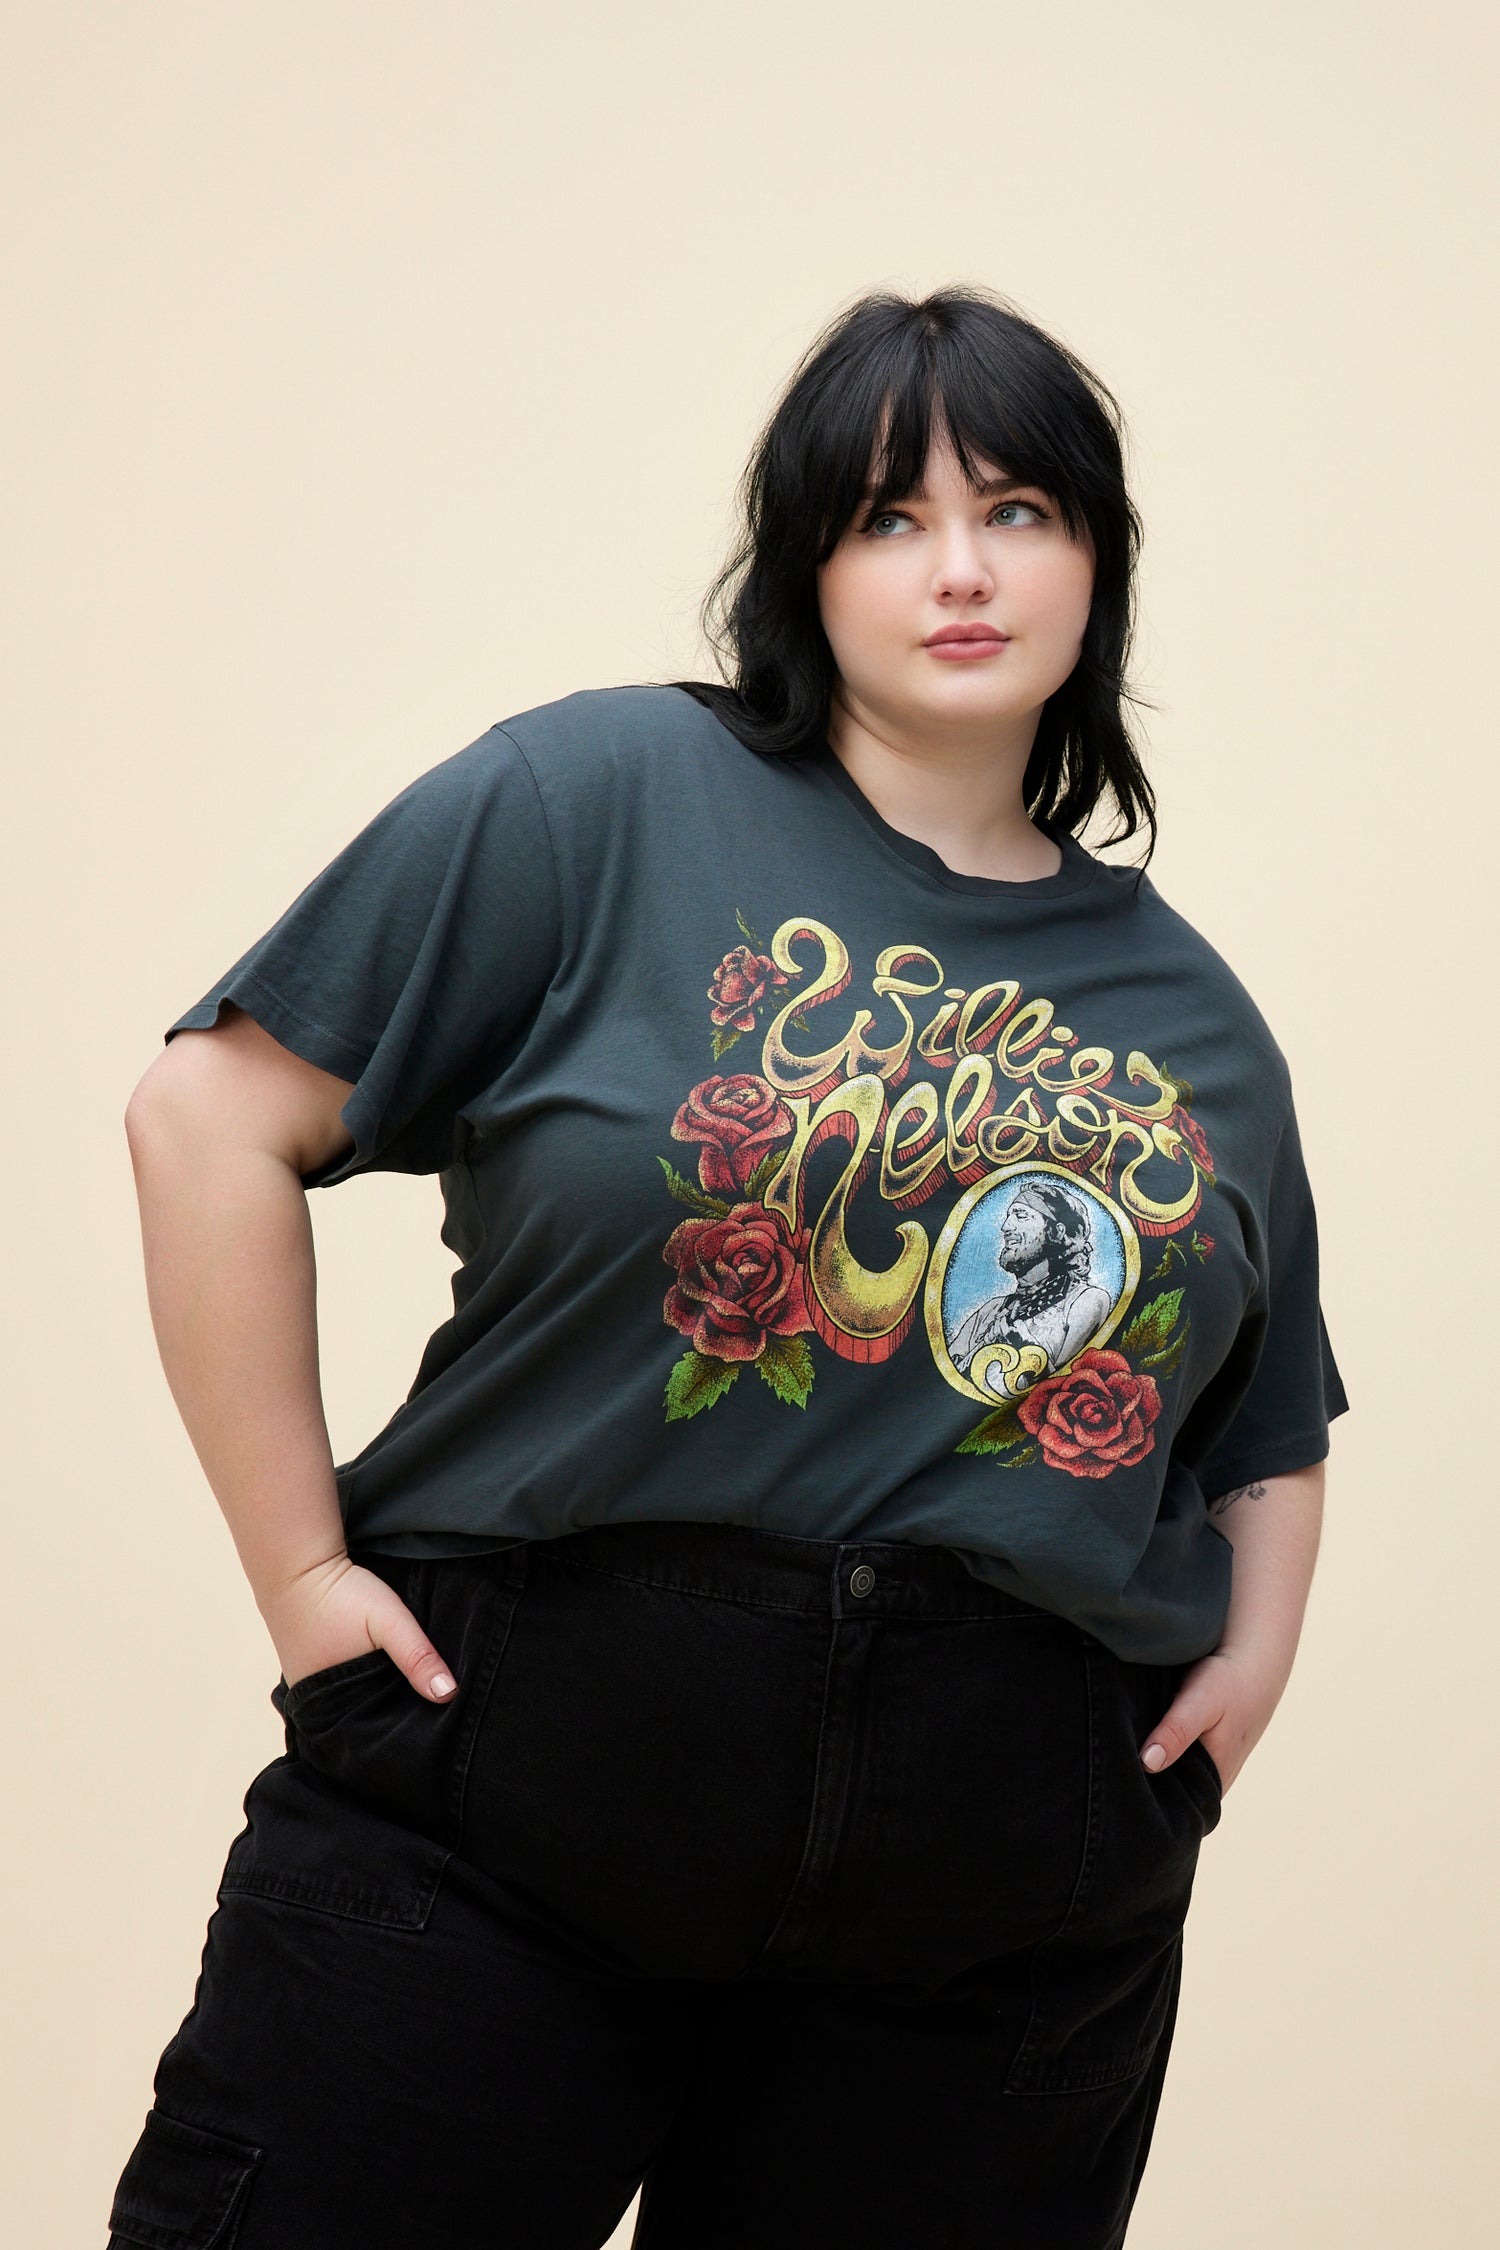 A model featuring a black tee ES stamped with "Willie Nelson" designed with roses around.